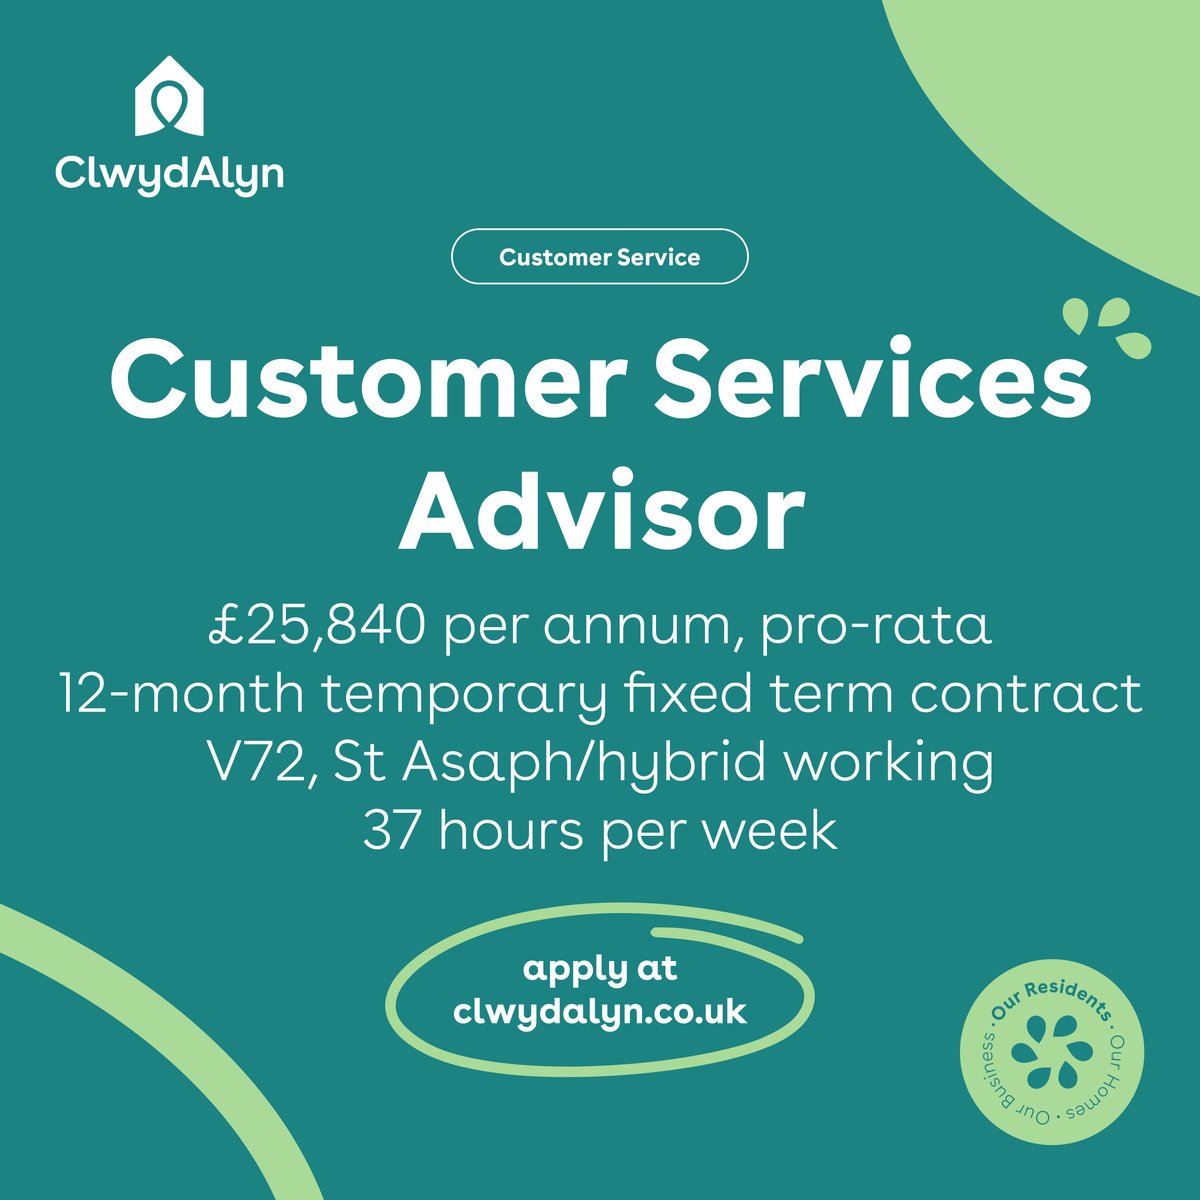 Want to work for an organisation that makes a positive difference in their local community? Apply to be a Customer Service Advisor with ClwydAlyn! Click here for more information and how to apply: clwydalyn.co.uk/work-for-us/